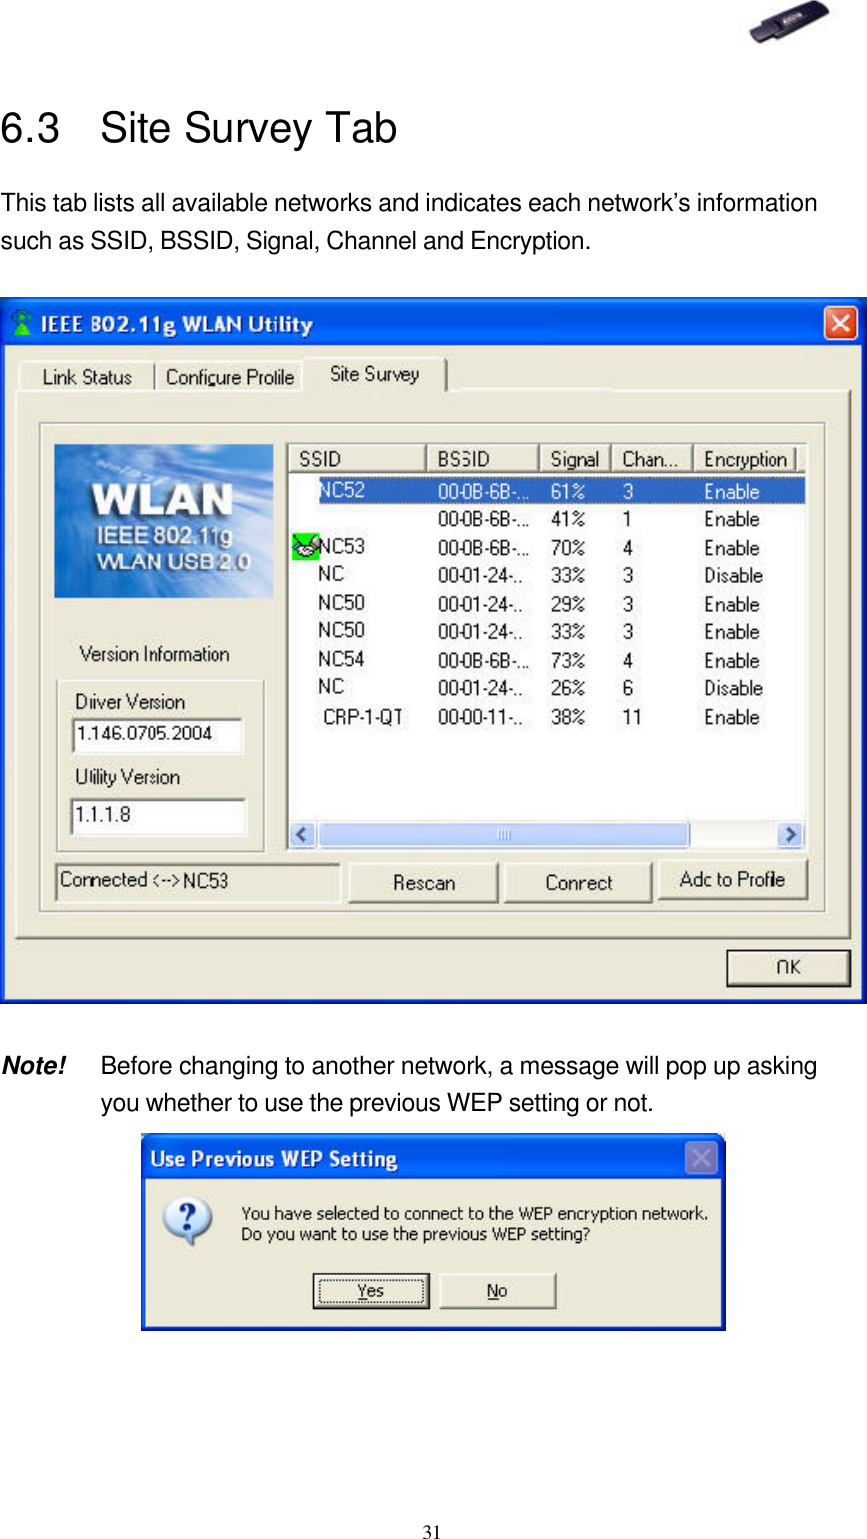   31 6.3 Site Survey Tab This tab lists all available networks and indicates each network’s information such as SSID, BSSID, Signal, Channel and Encryption.    Note! Before changing to another network, a message will pop up asking you whether to use the previous WEP setting or not.  